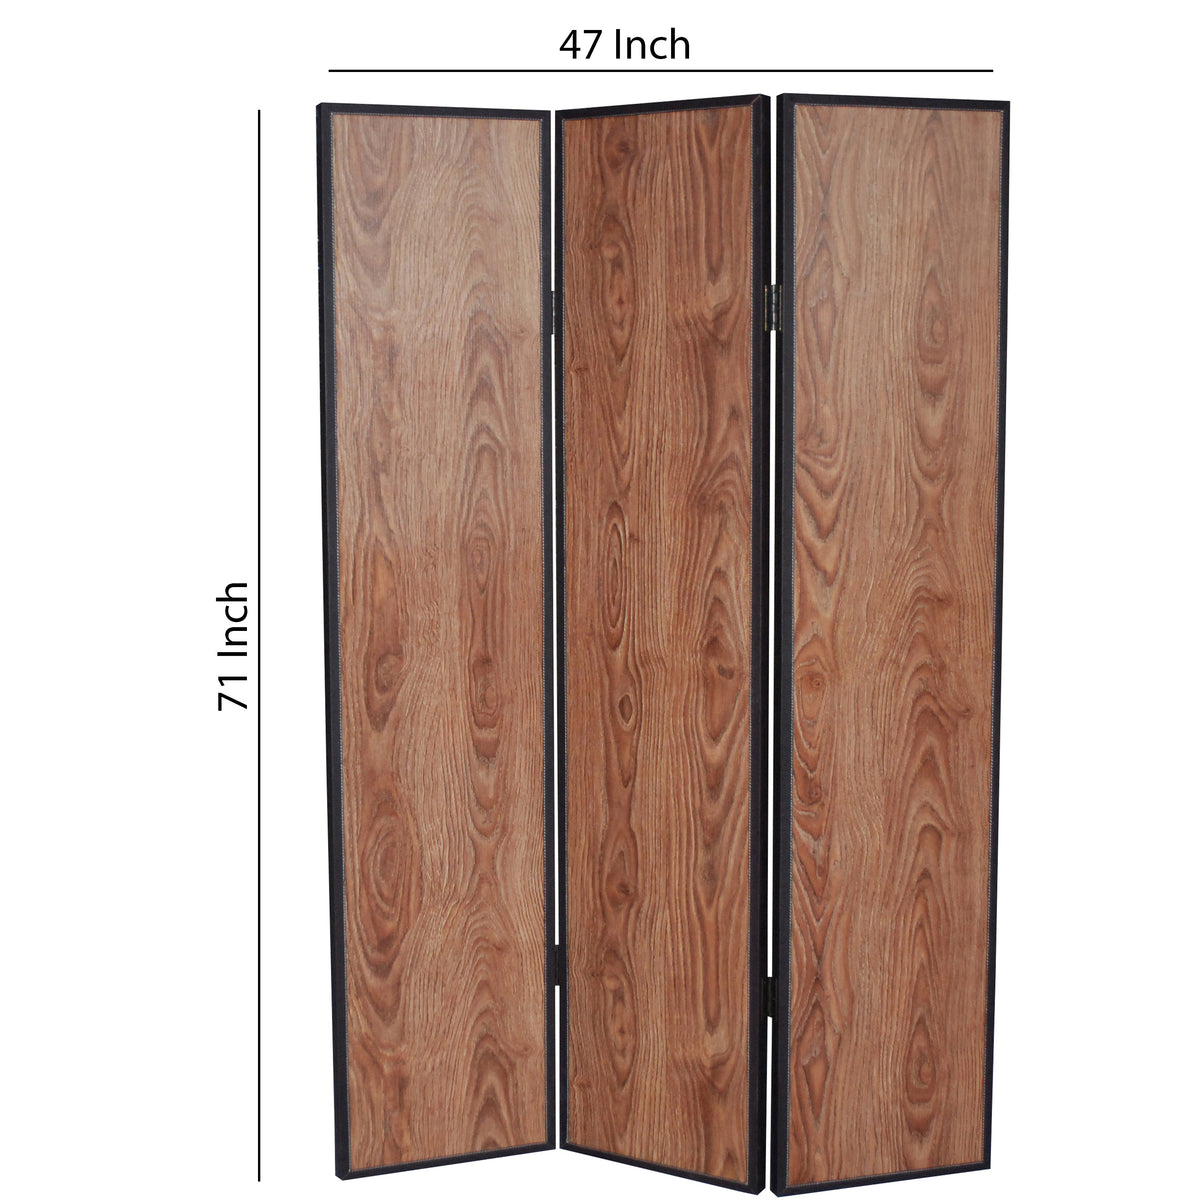 3 Panel Foldable Wooden Screen with Grain Details, Brown - BM26601